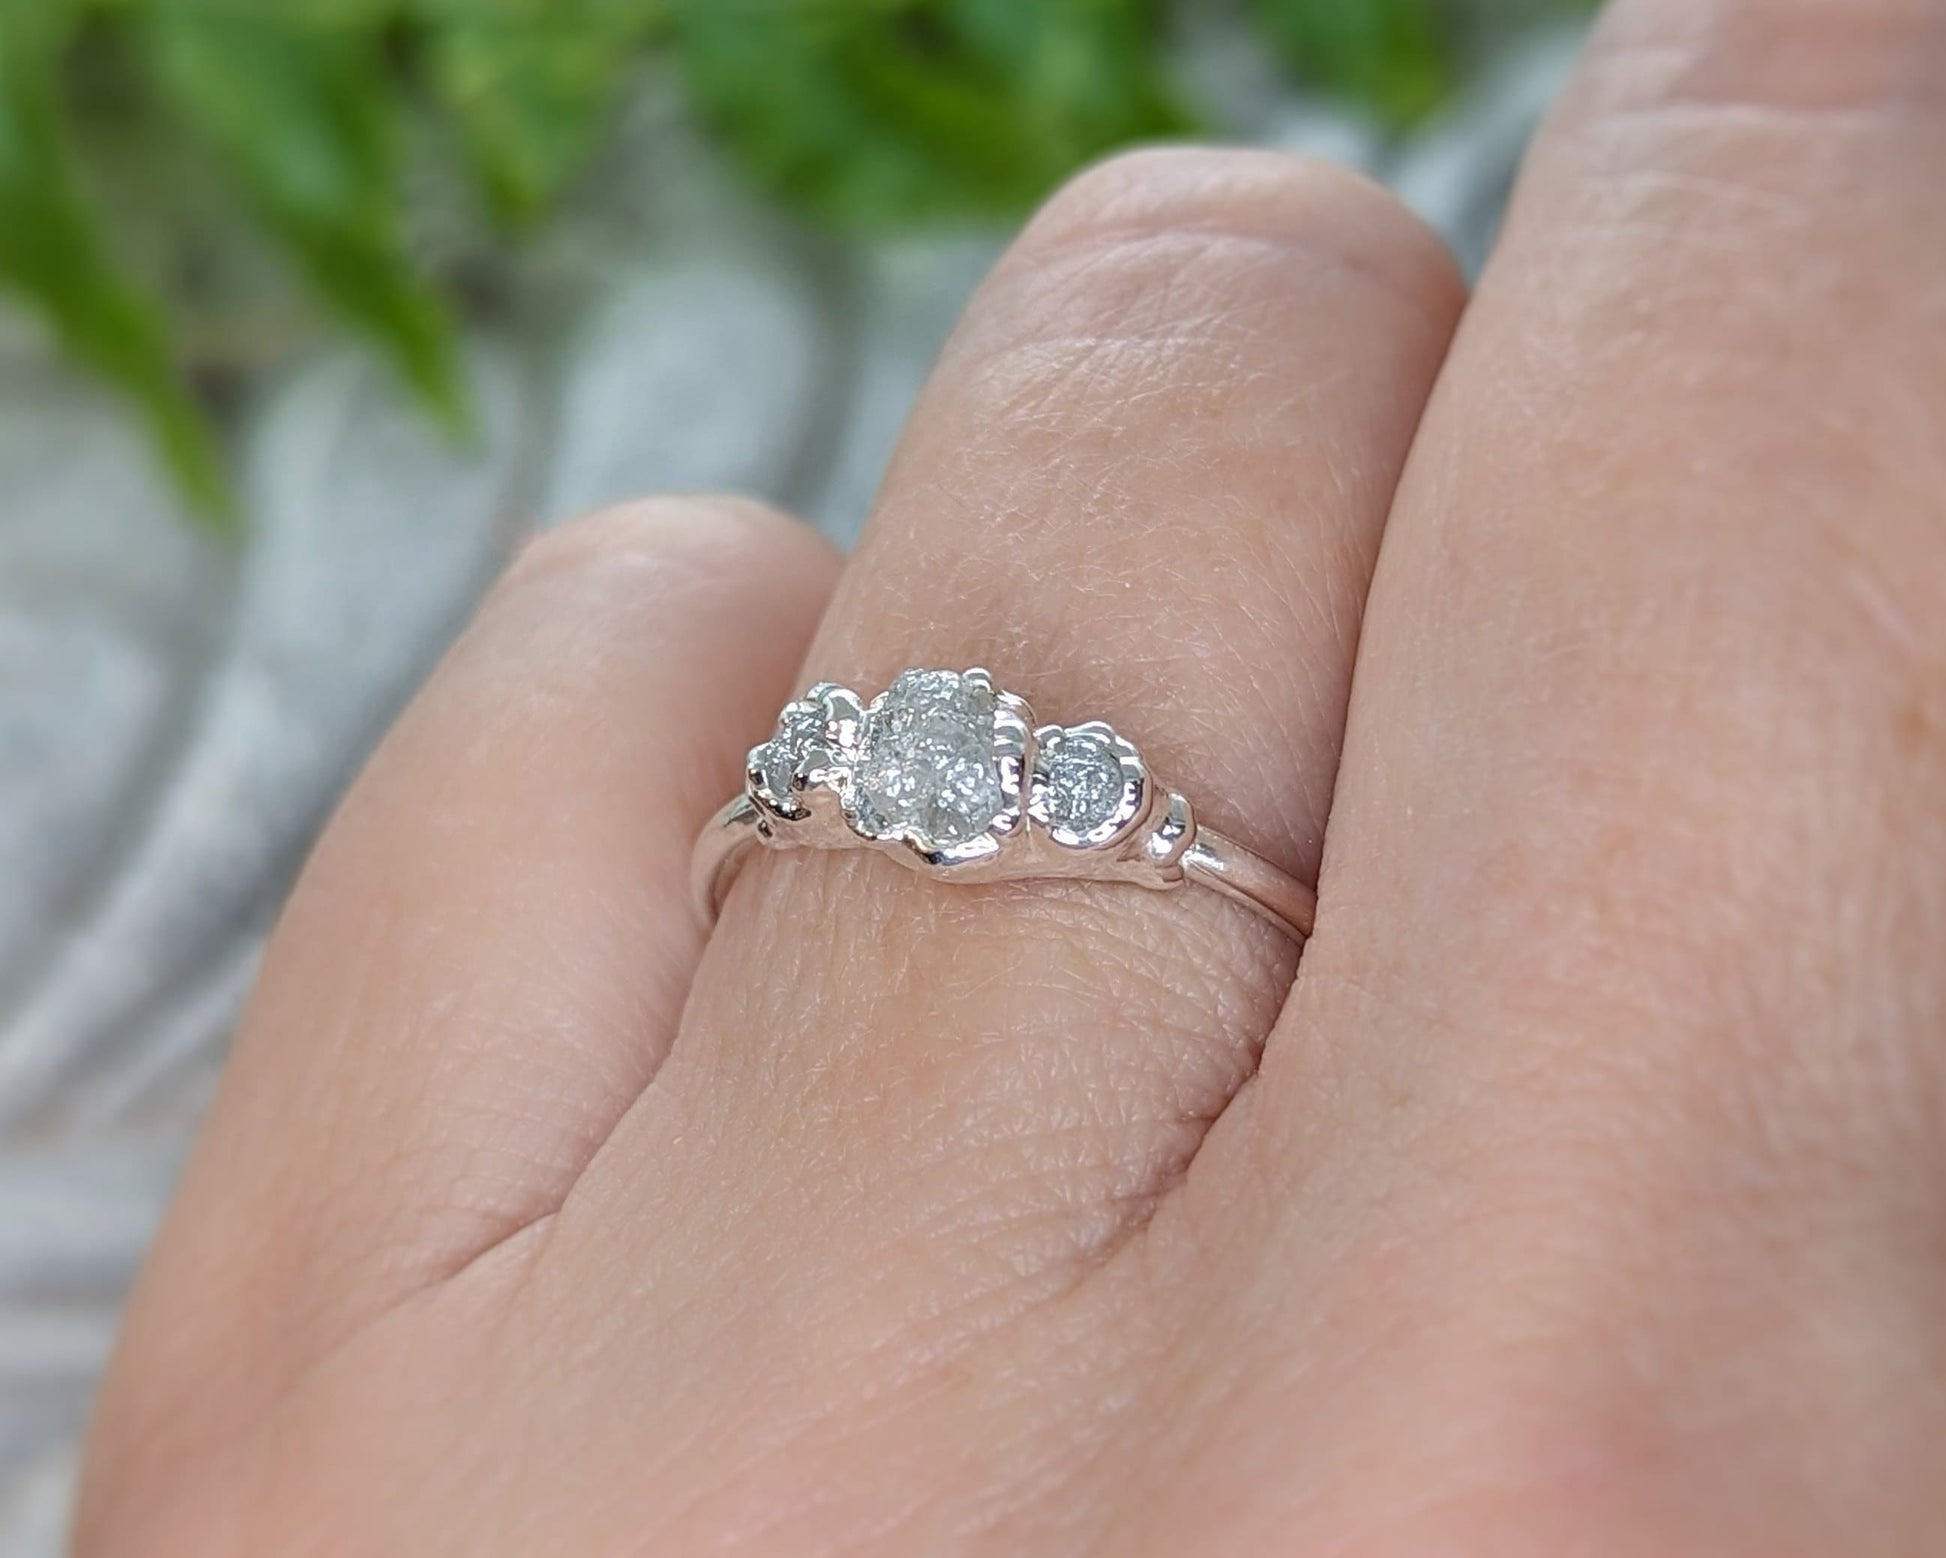 Raw uncut 3-diamond engagement ring in unique Fine 99.9 Silver setting